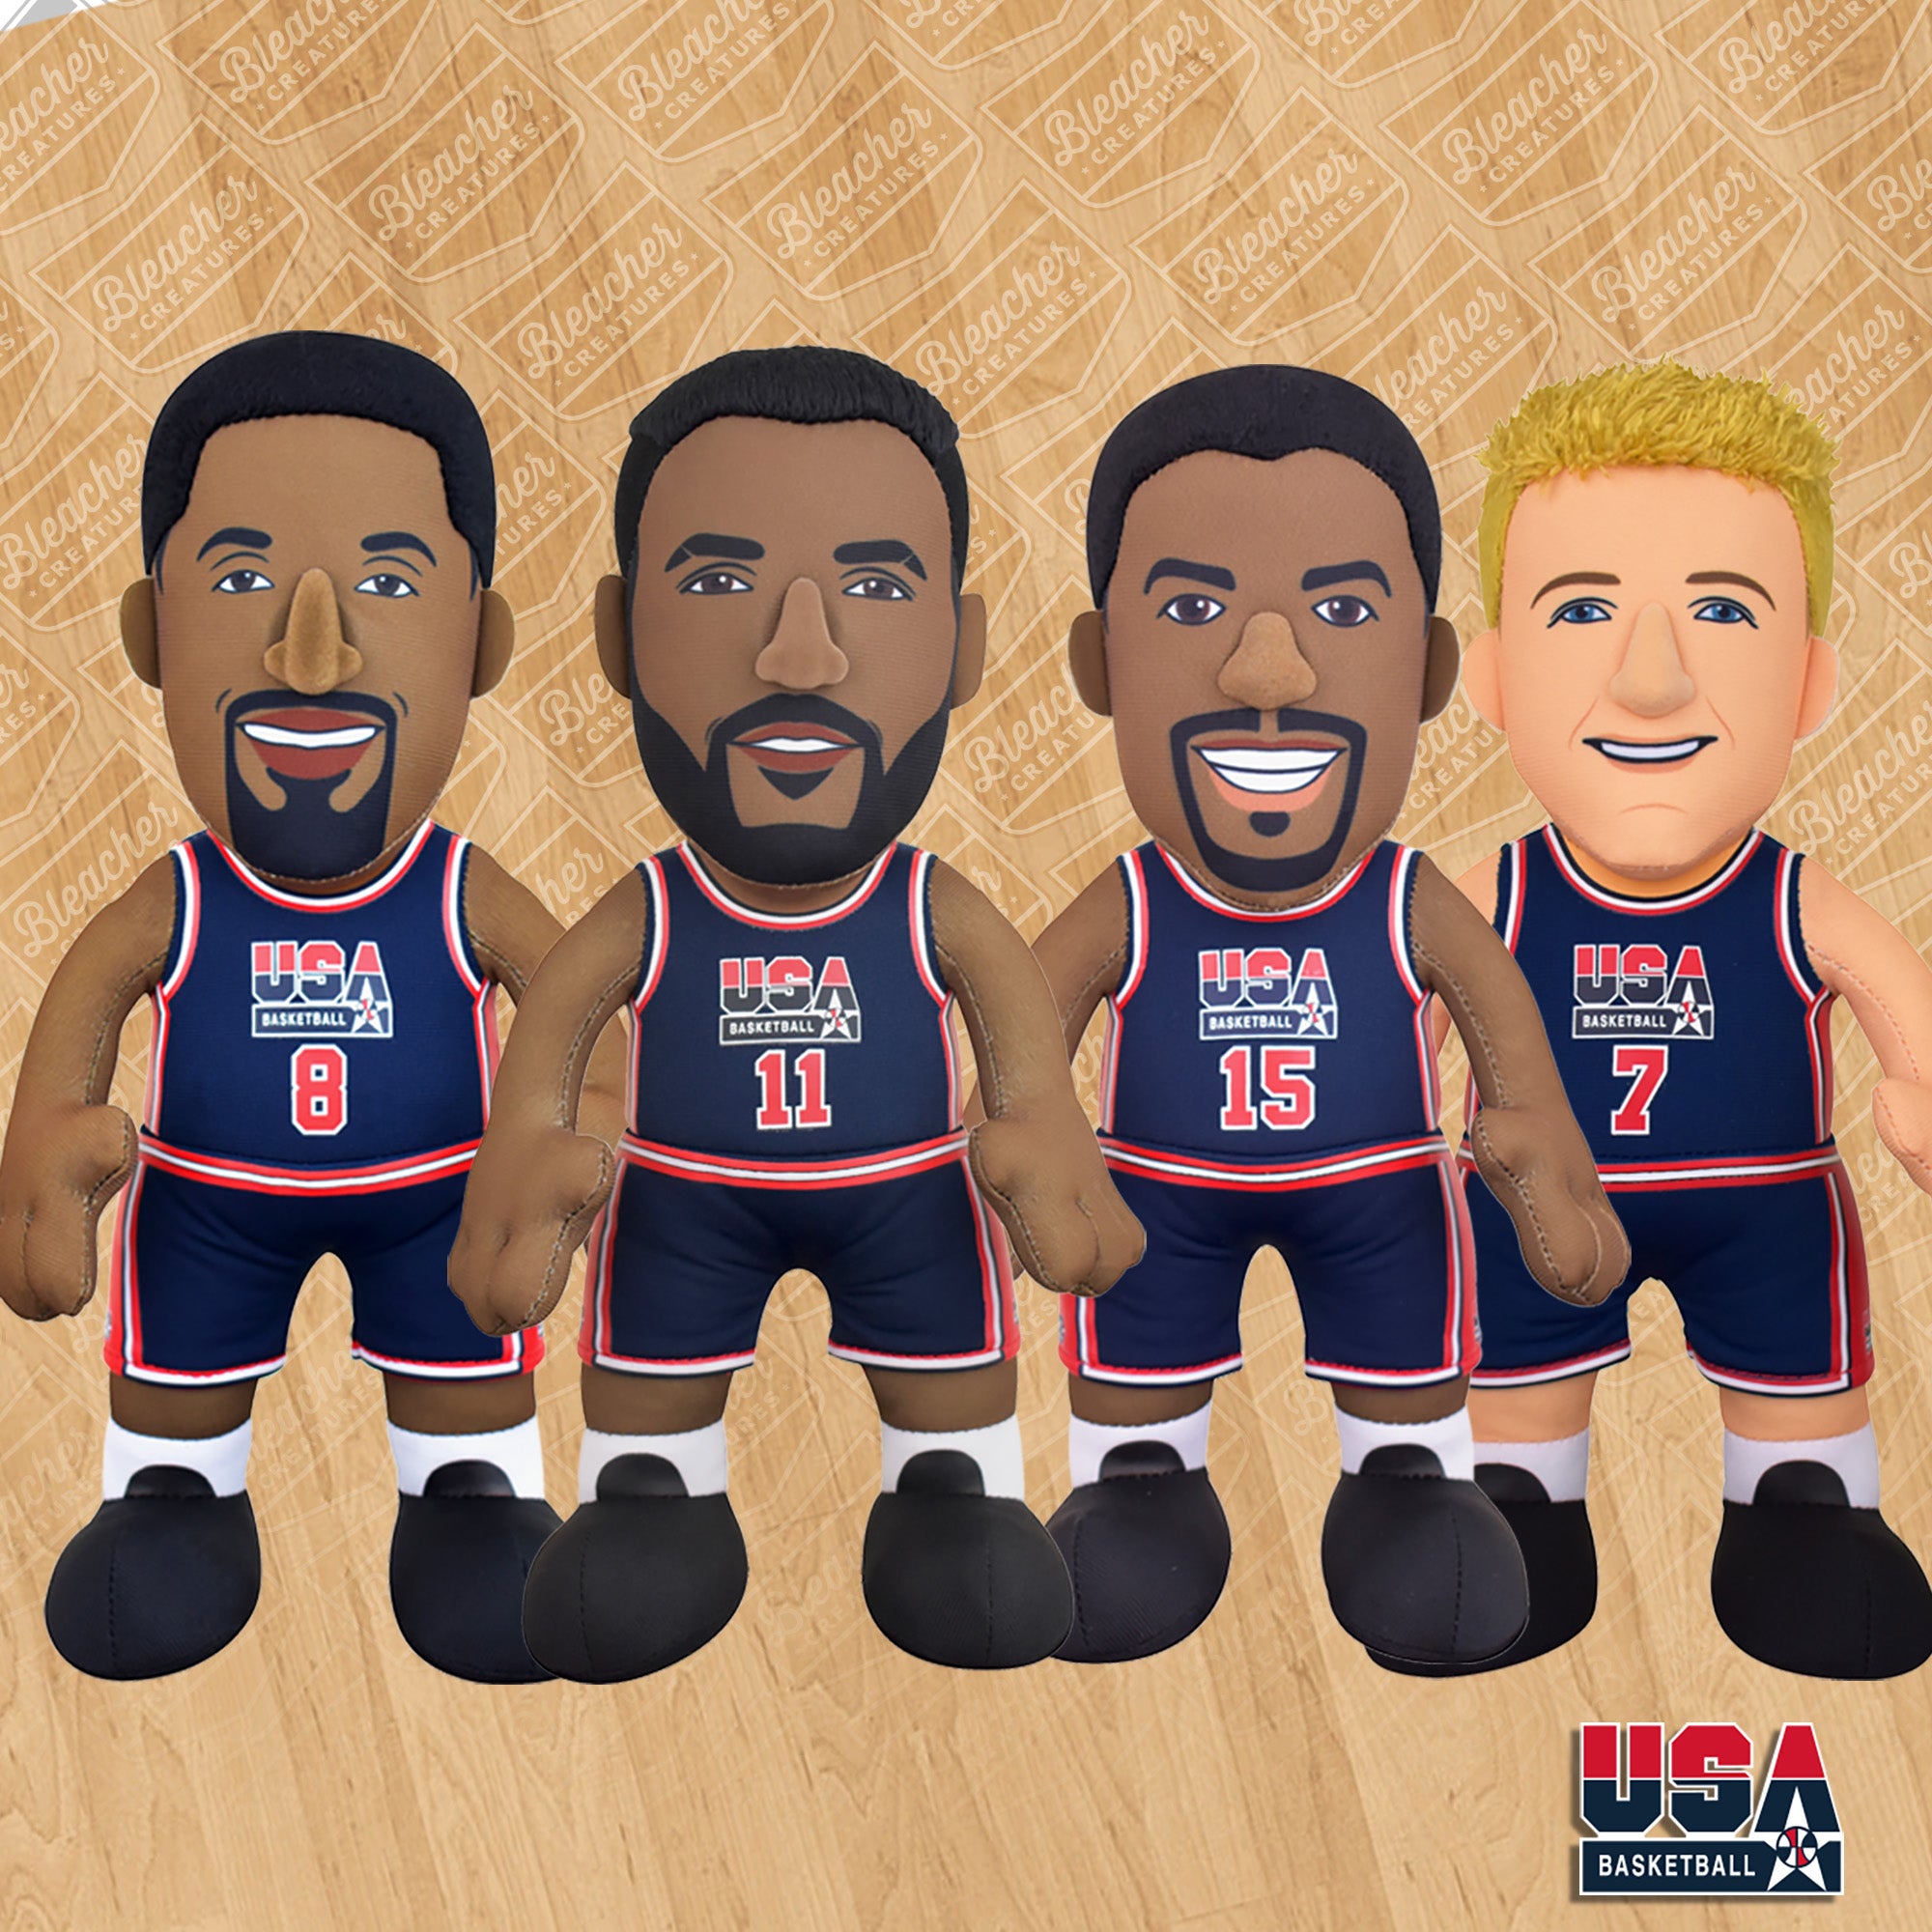 Uncanny Brands Introduces Bleacher Creature Plush and Phenom Gallery Prints in Licensing Agreement with USA Basketball